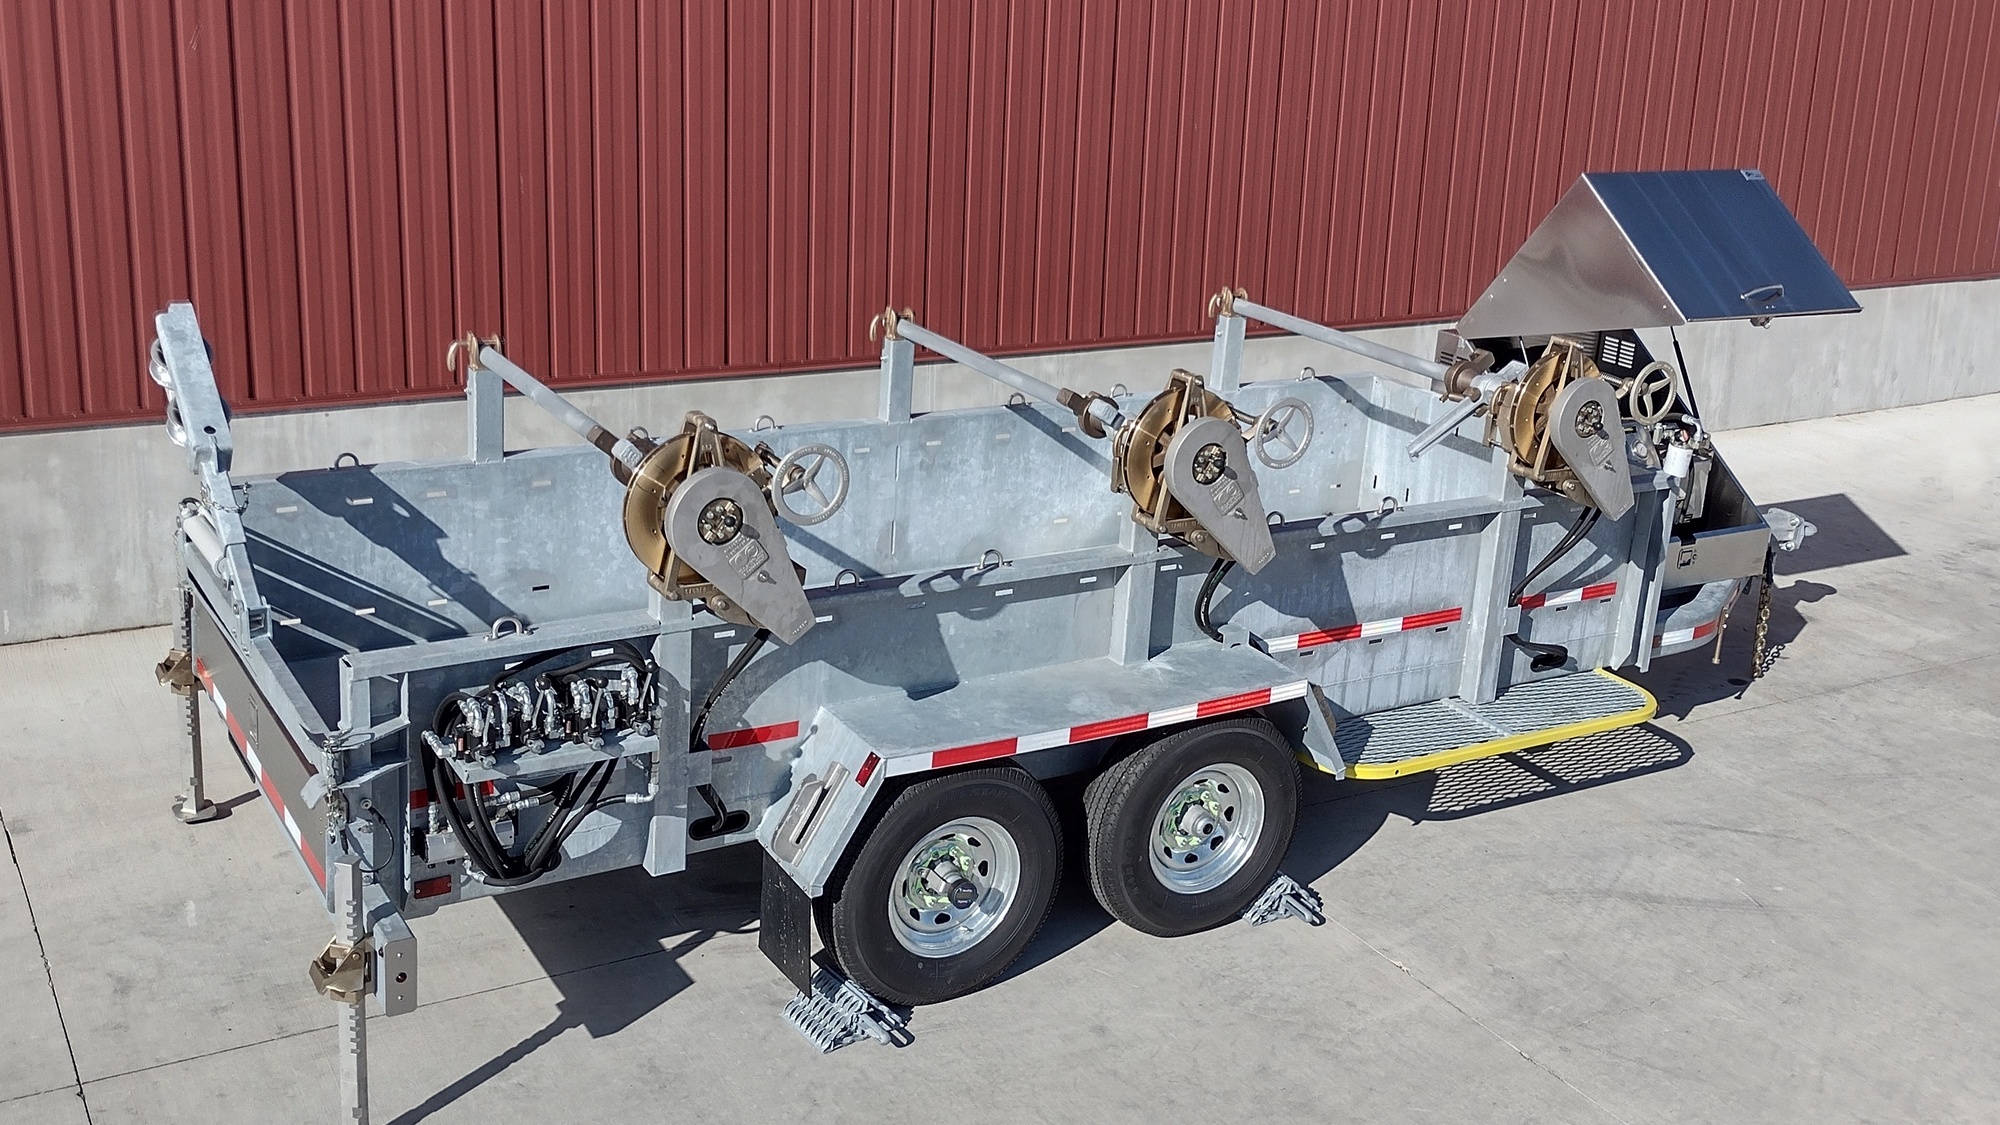 Right Rear overhead view of Model 1530 Three Reel Trailer with Model 1602 All Bronze Tensioning Brakes and Model 1000 Series Take-Up Retrievers powered by onboard Model 1010-K Power Source. The trailer is shown in front of a red metal building on concrete.